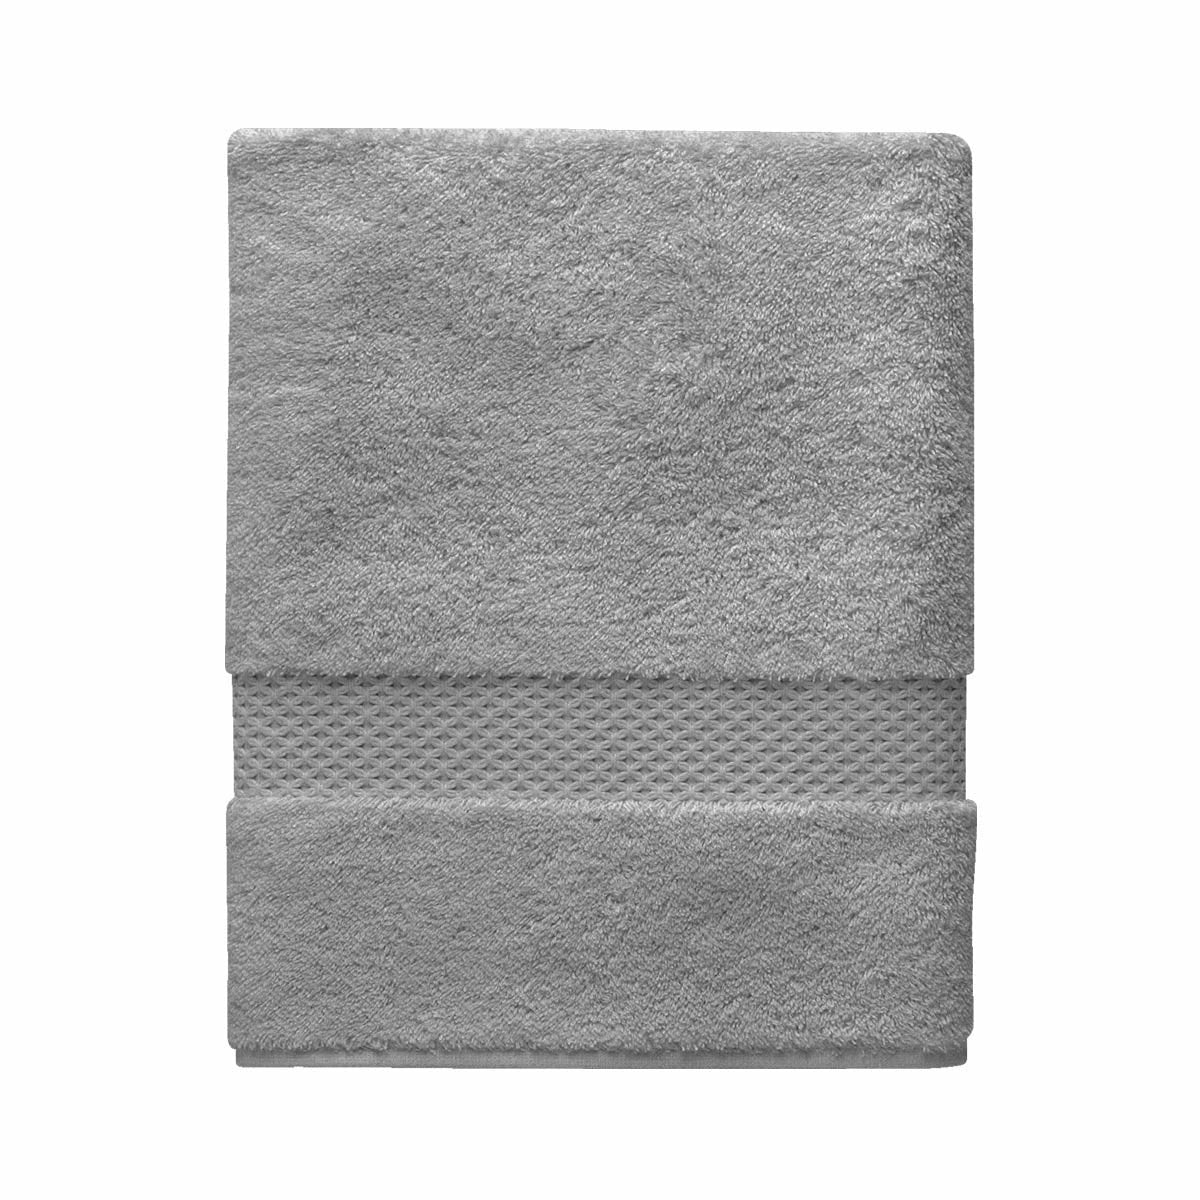 Yves Delorme Etoile Bath Towels and Mats Silo Platine Fine Linens